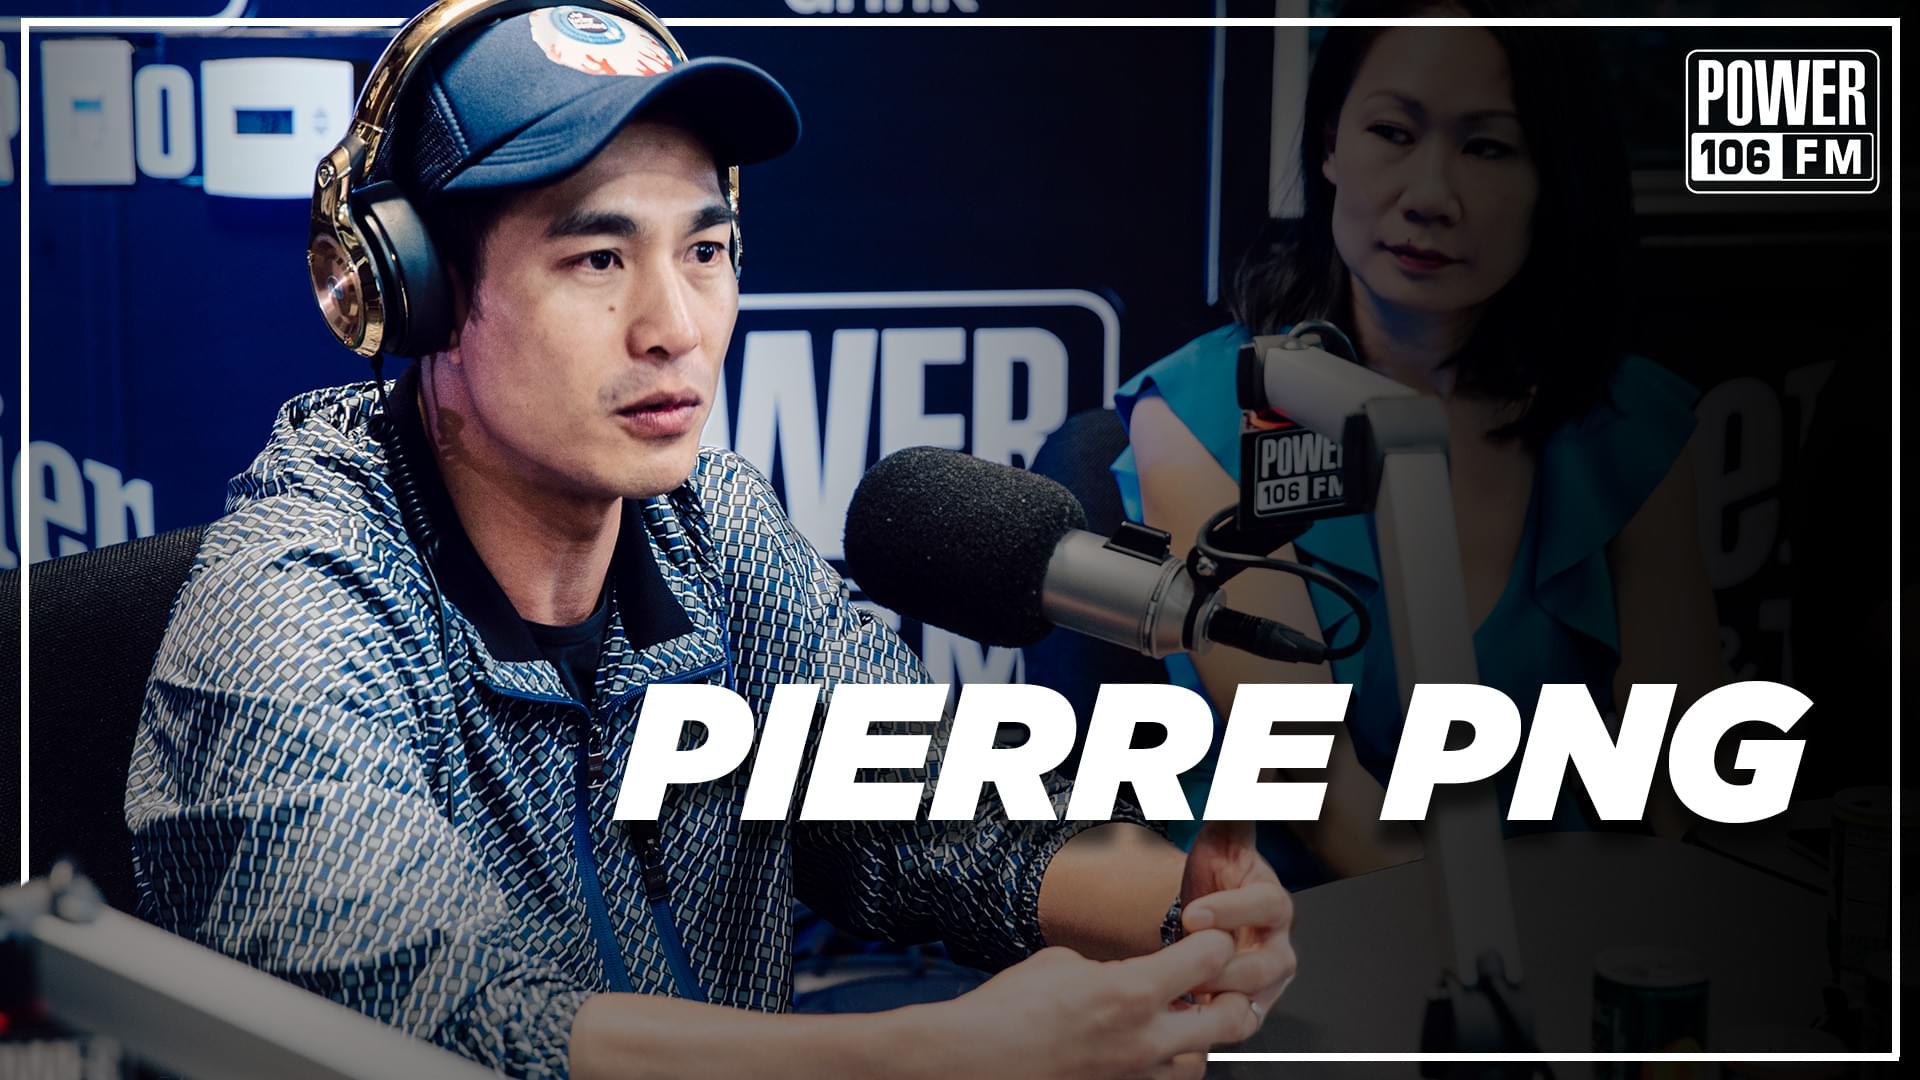 Pierre PNG On ‘Crazy Rich Asians’ Cast + His Feelings About Nude Scenes [WATCH]